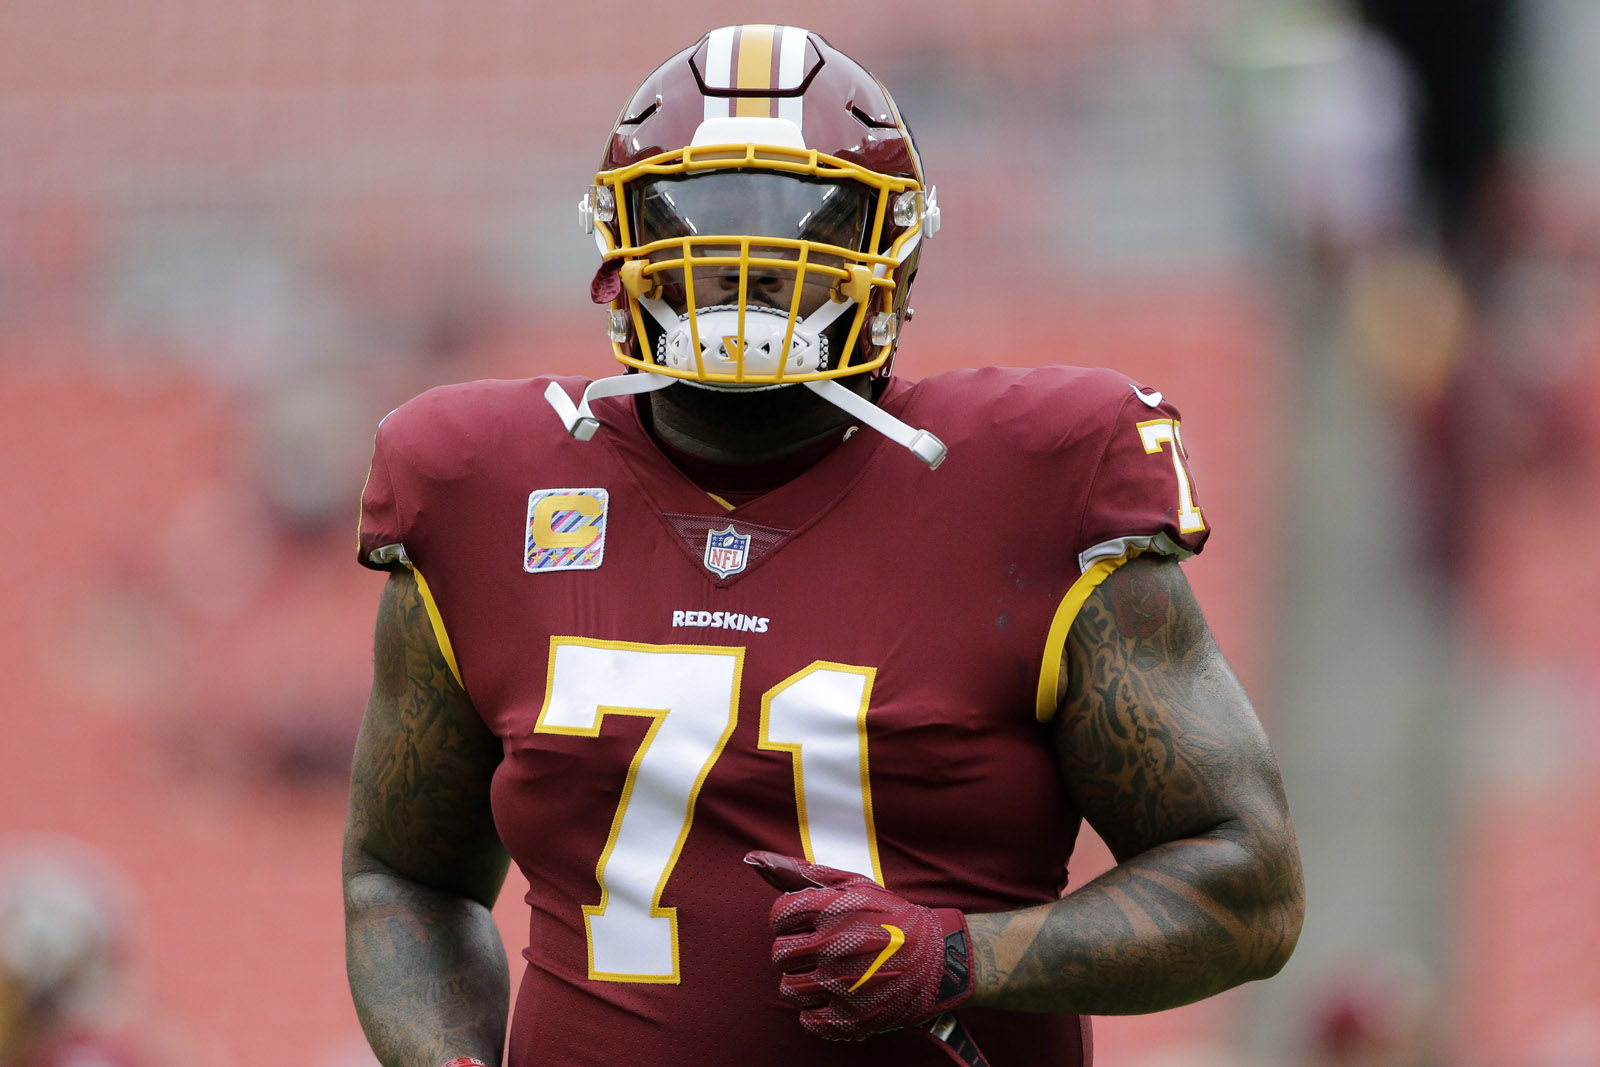 Washington Redskins offensive tackle Trent Williams was also named to the 2018 Pro Bowl. This is his sixth straight selection to the Pro Bowl and the sixth of his career. (AP Photo/Mark Tenally)